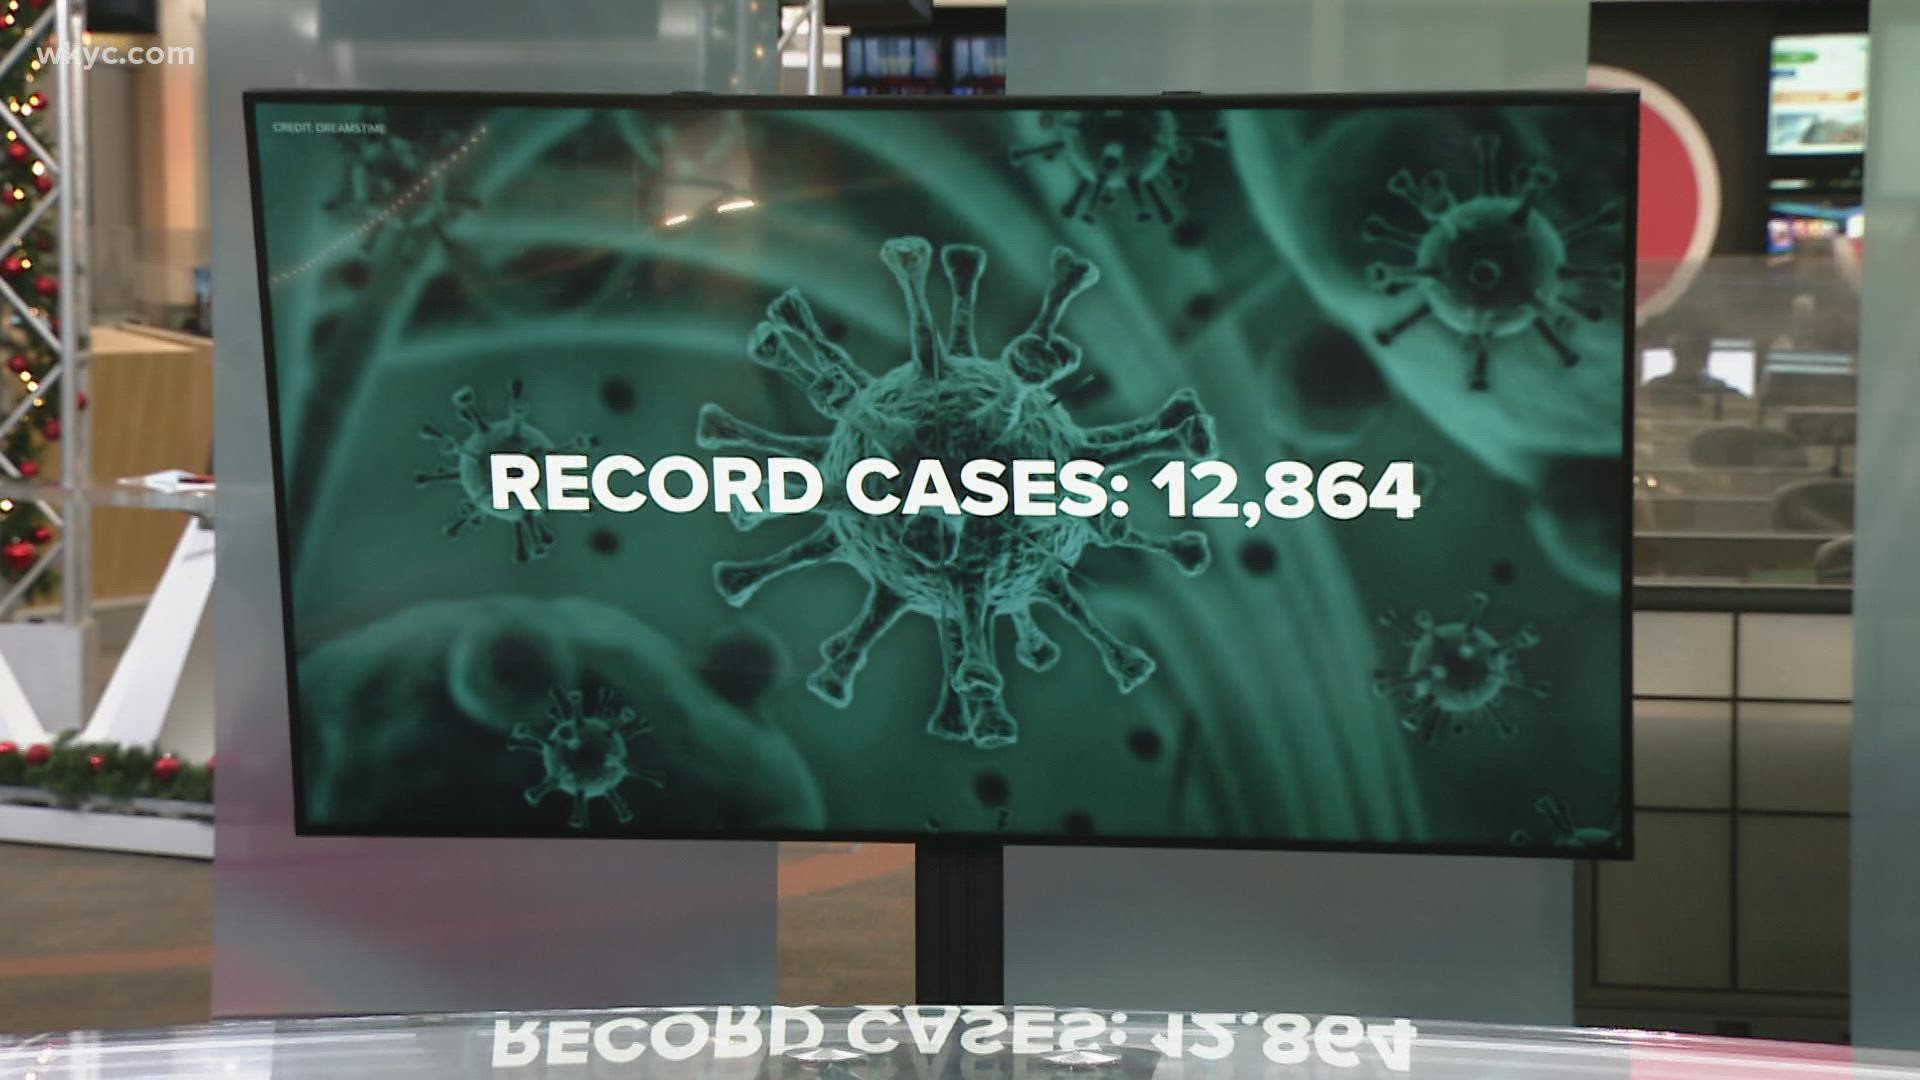 For the second straight day, Ohio is reporting a record number of new COVID-19 cases with 12,864.